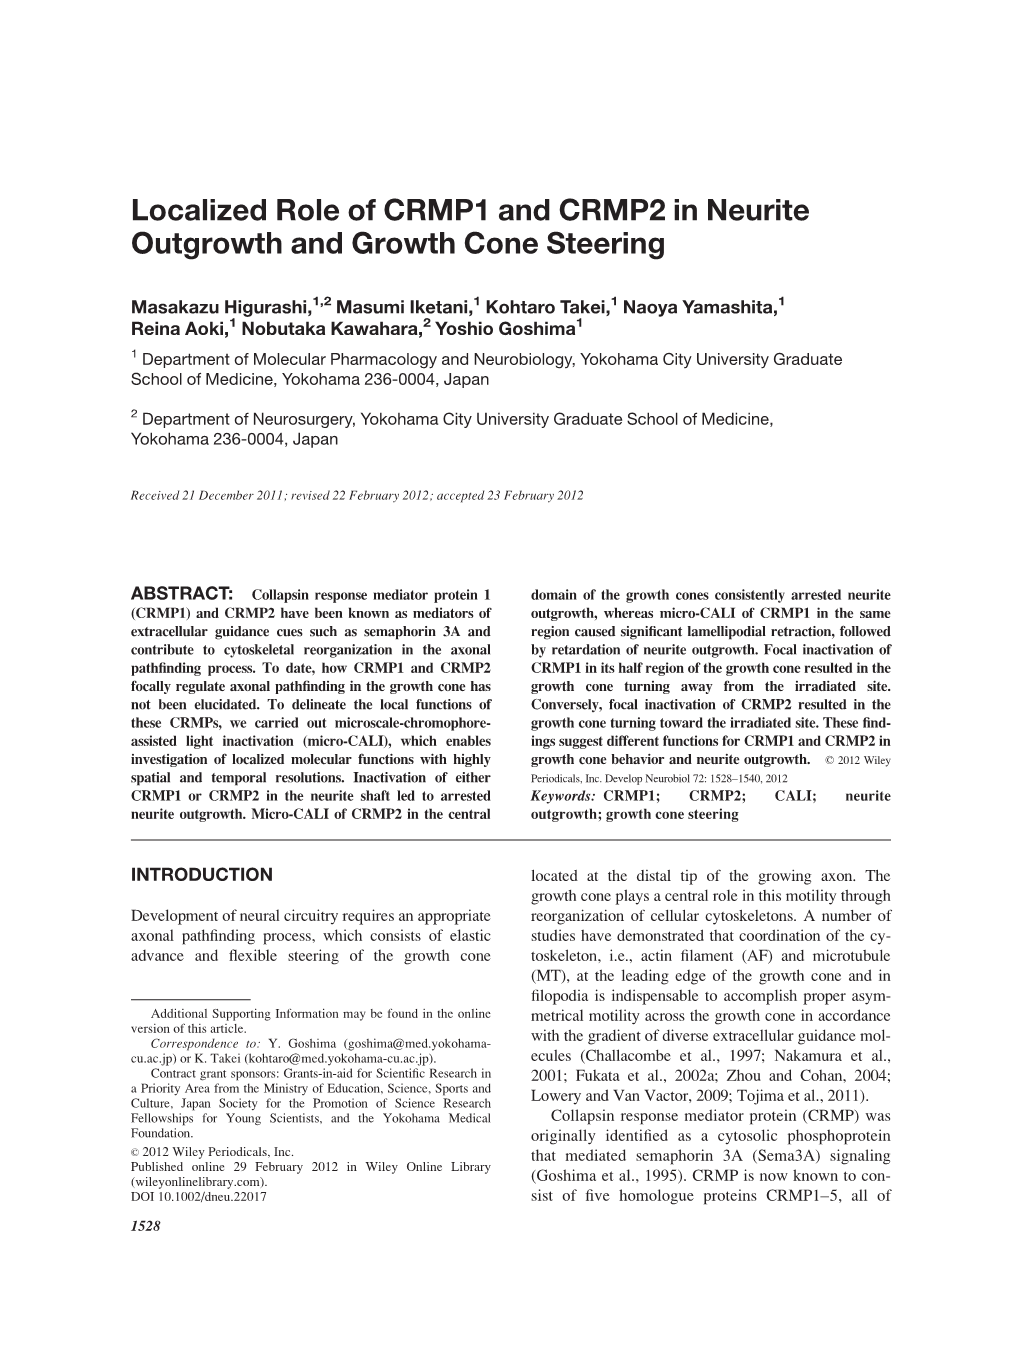 Localized Role of CRMP1 and CRMP2 in Neurite Outgrowth and Growth Cone Steering